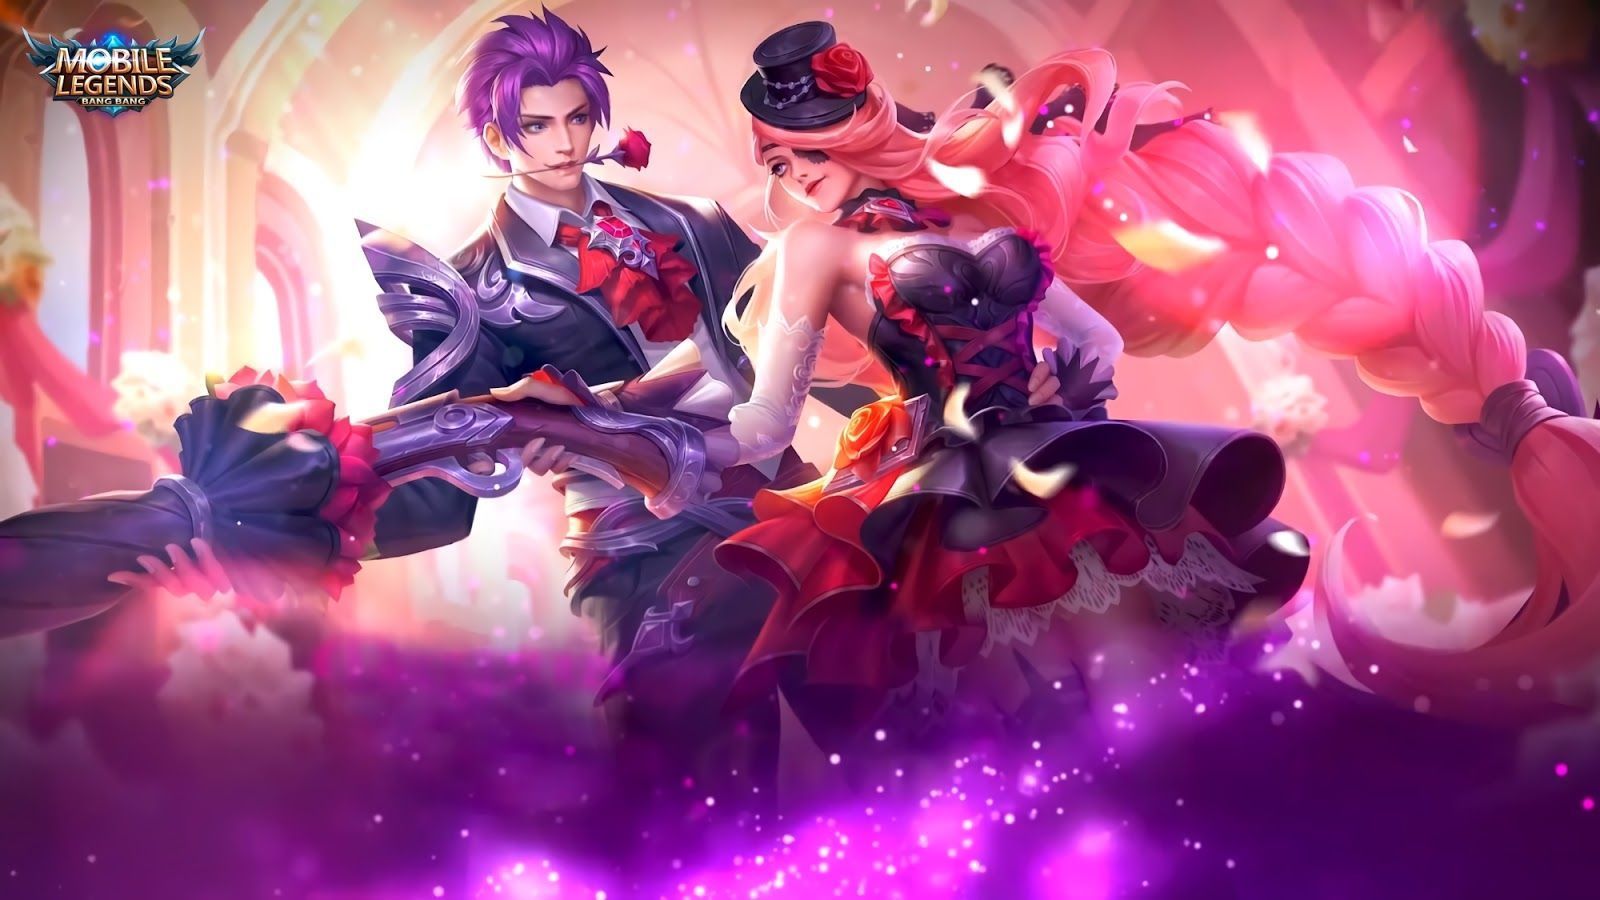 Gusion Dangerous Laison and Lesley Dangerous Love Valentine's Day Special Skin F. Dan. Mobile legend wallpaper, Mobile legends, Alucard mobile legends